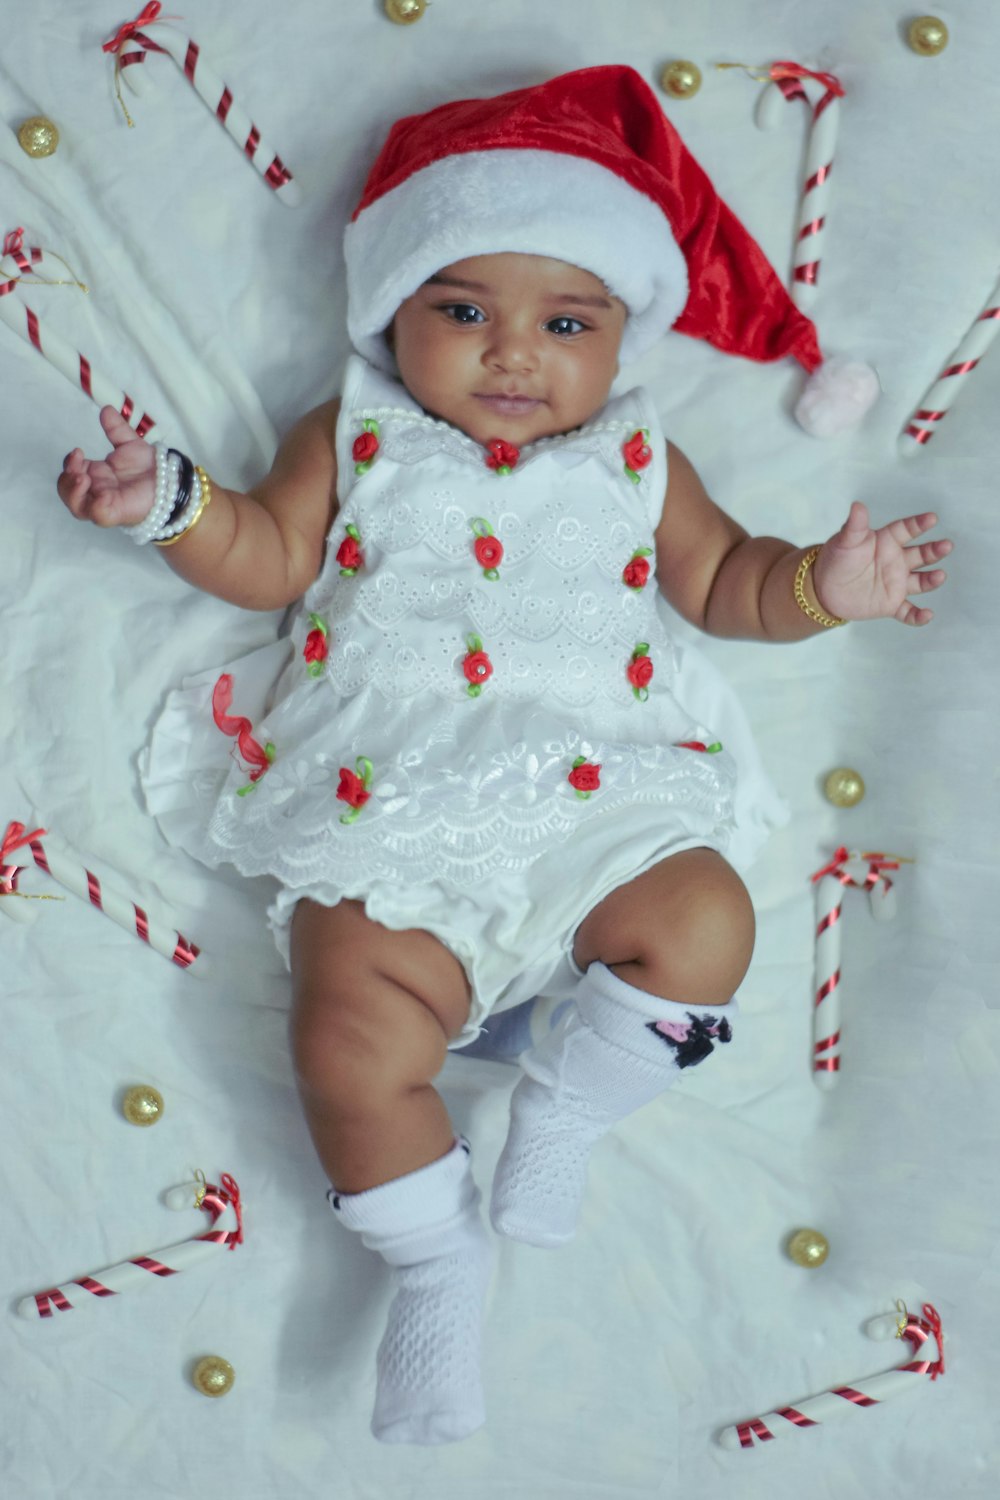 a baby wearing a santa hat and holding candy canes